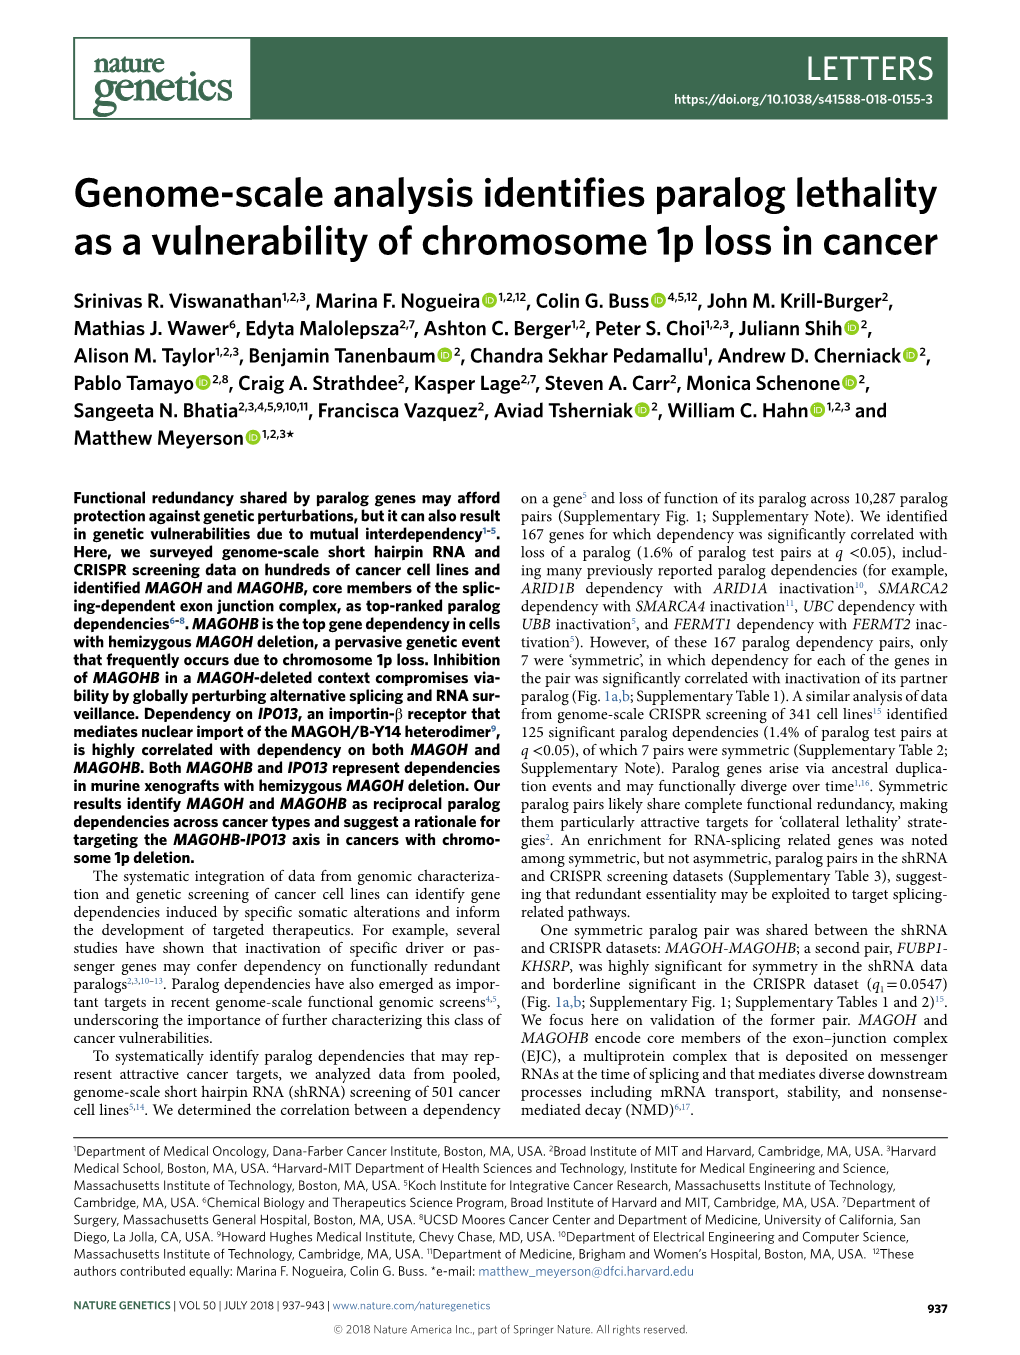 Genome-Scale Analysis Identifies Paralog Lethality As a Vulnerability of Chromosome 1P Loss in Cancer